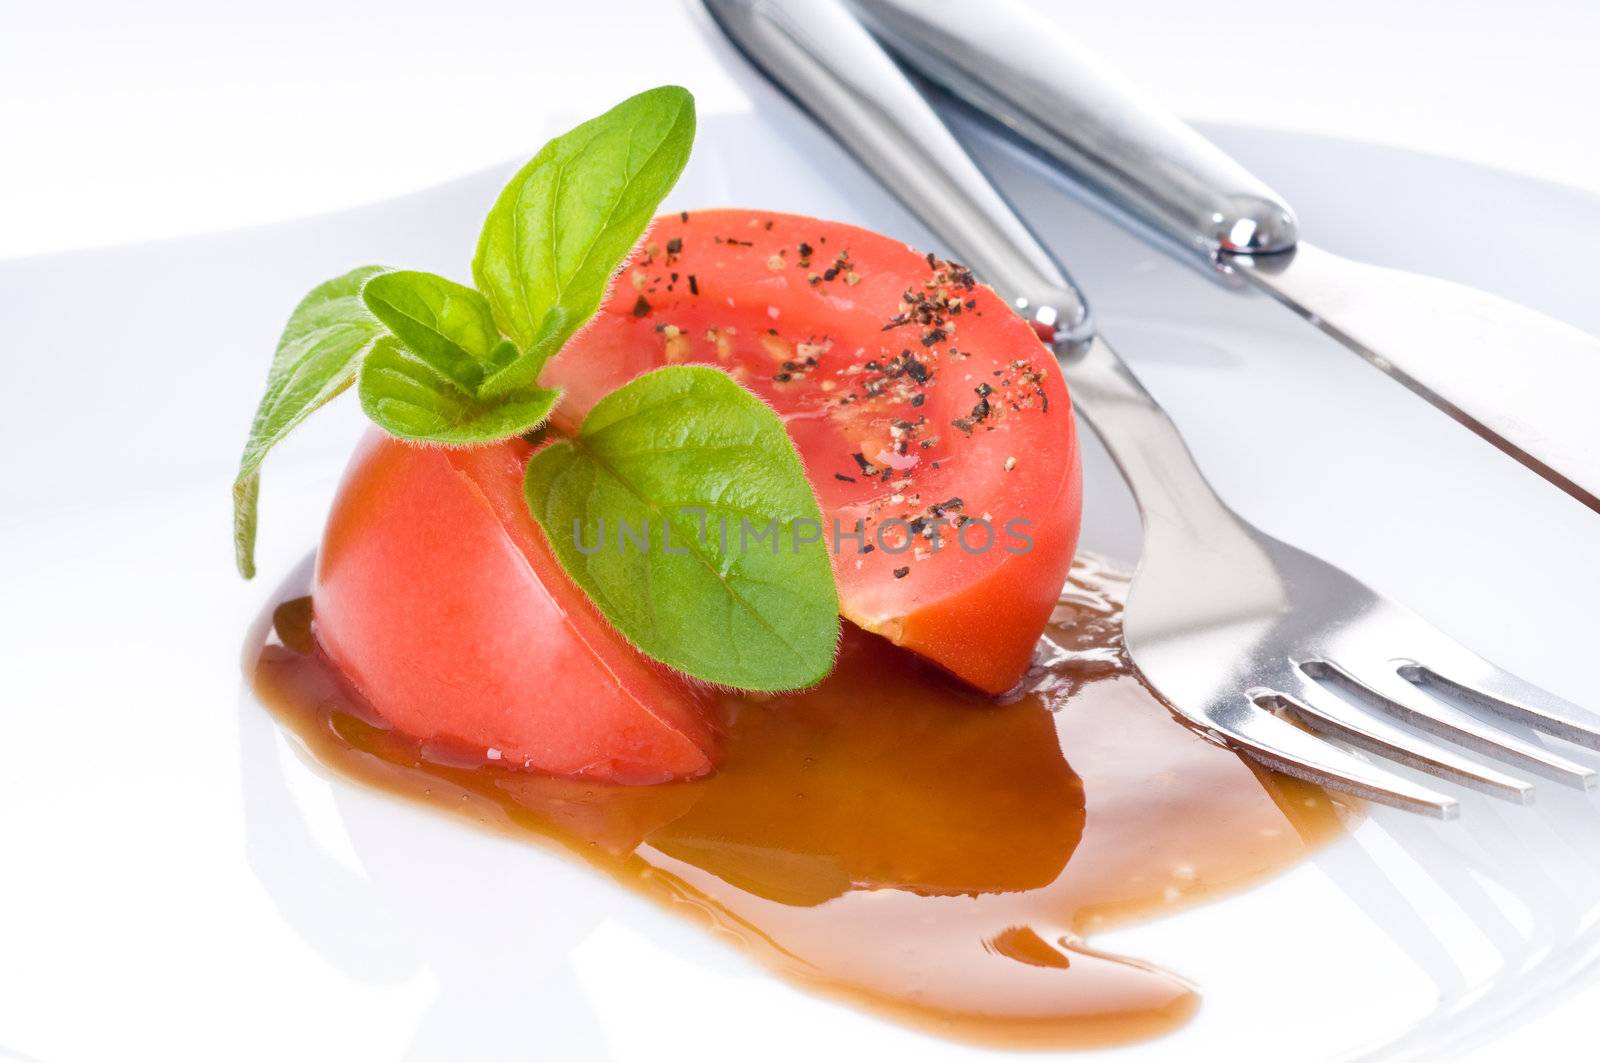 Tomato and Basil by billberryphotography